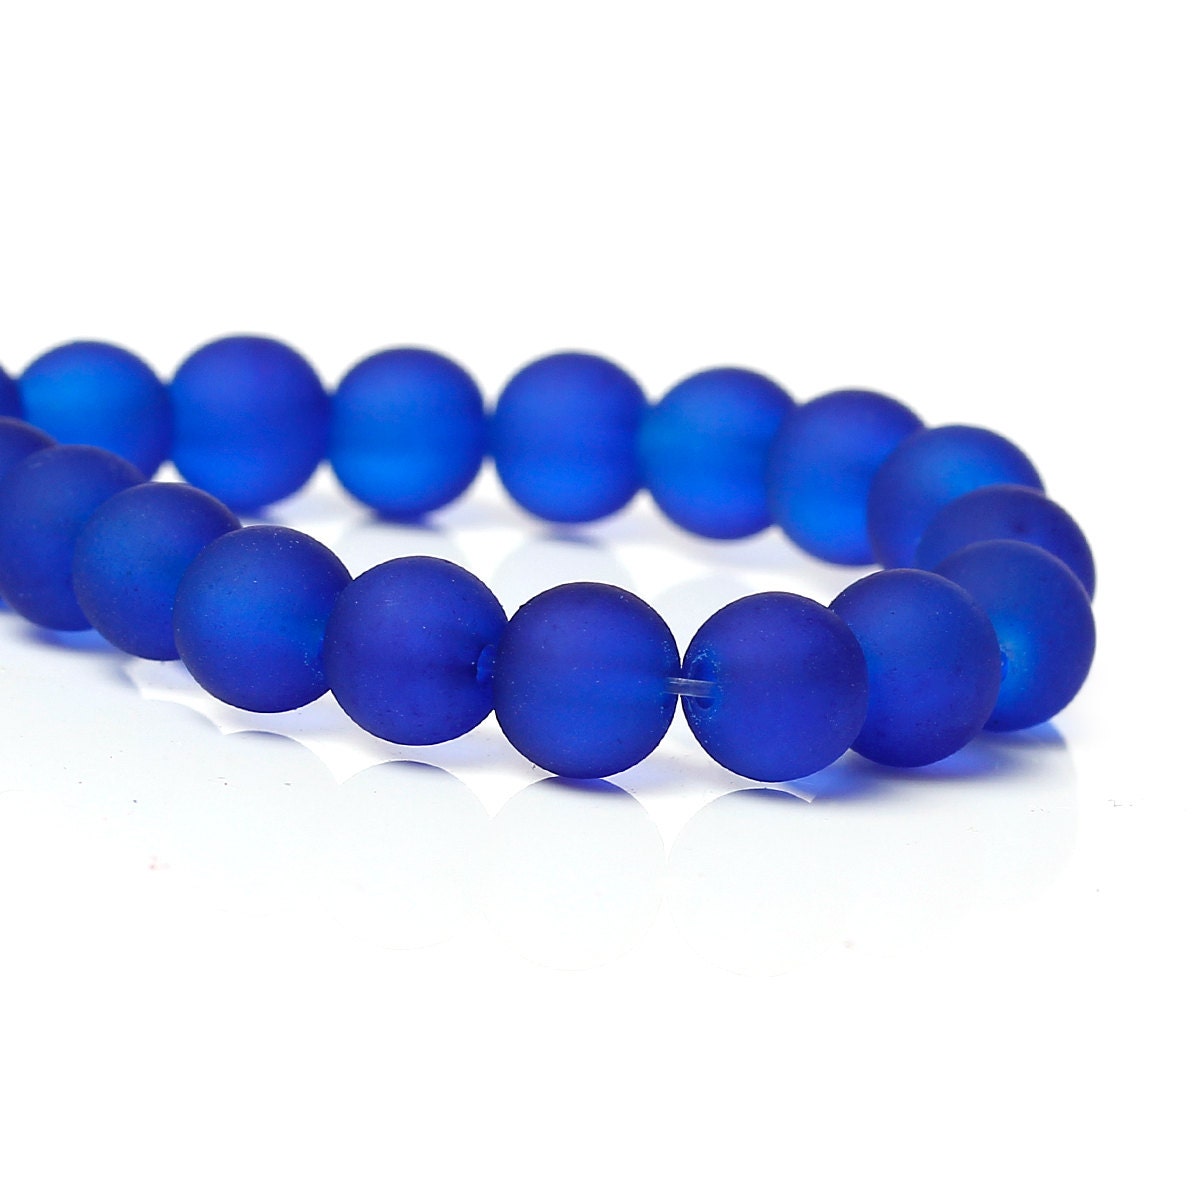 20 Cobalt Blue Frosted Glass Beads by OverstockBeadSupply on Etsy